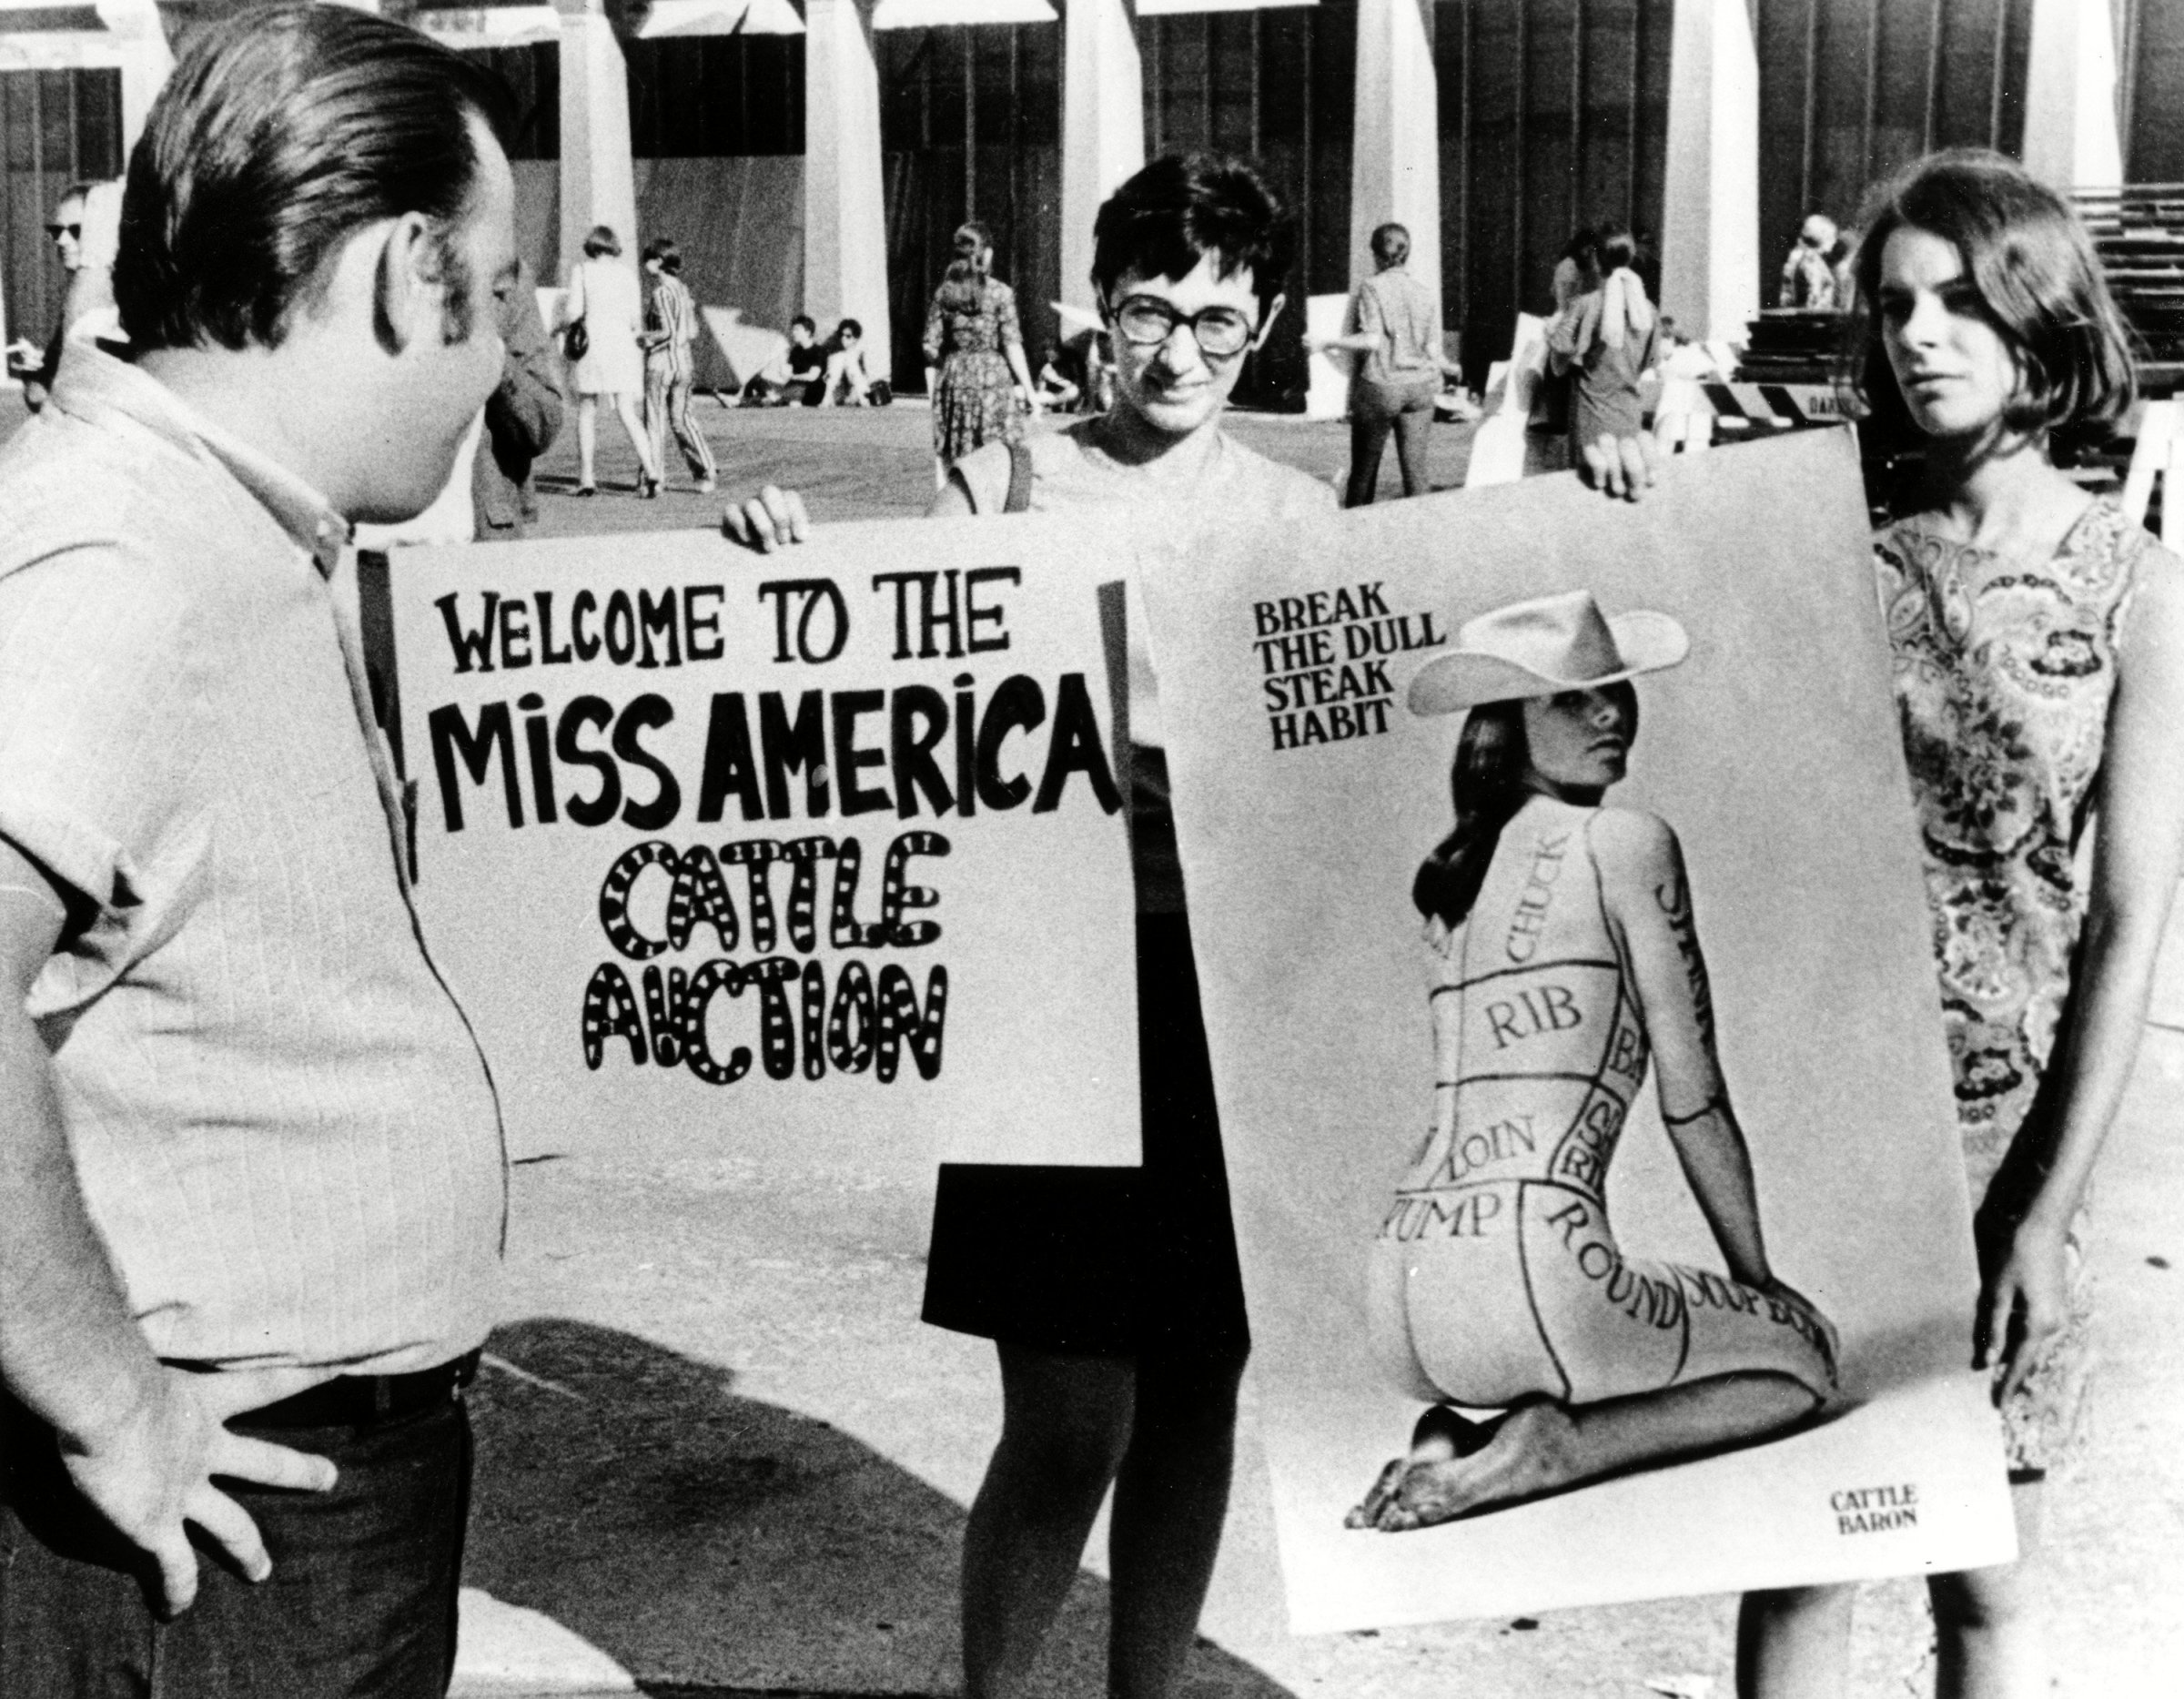 Miss America Pageant protest, Atlantic City, USA - 07 Sep 1968